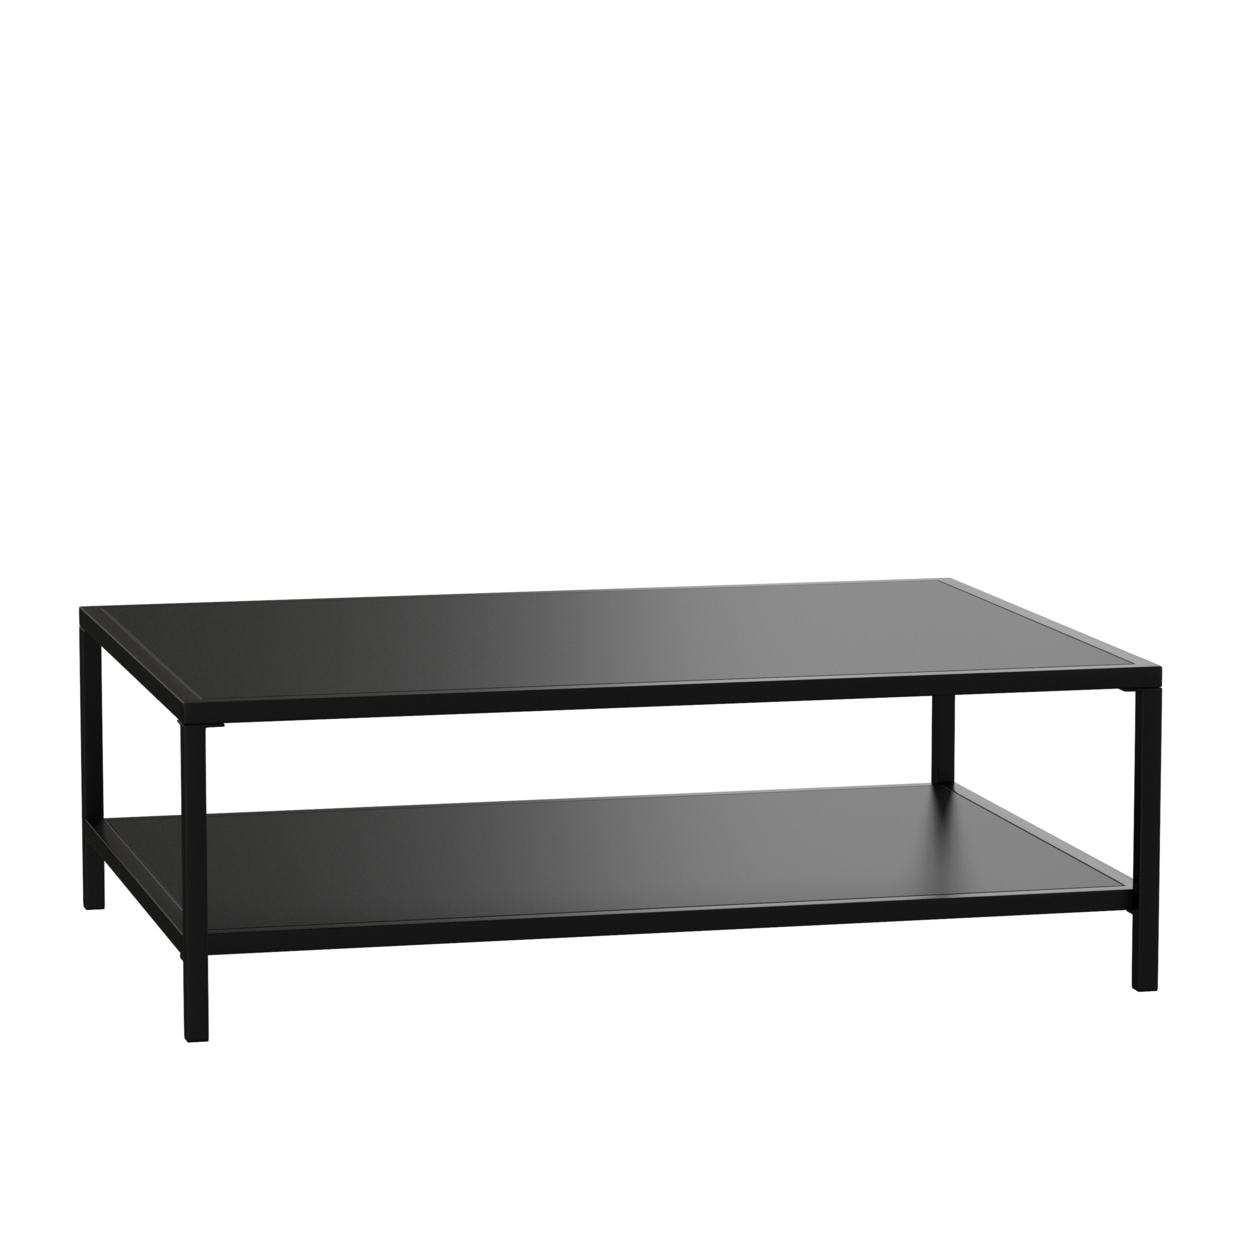 Outdoor 2 Tier Patio Coffee Table Commercial Grade Black Coffee Table For Deck, Porch, Or Poolside - Steel Square Leg Frame